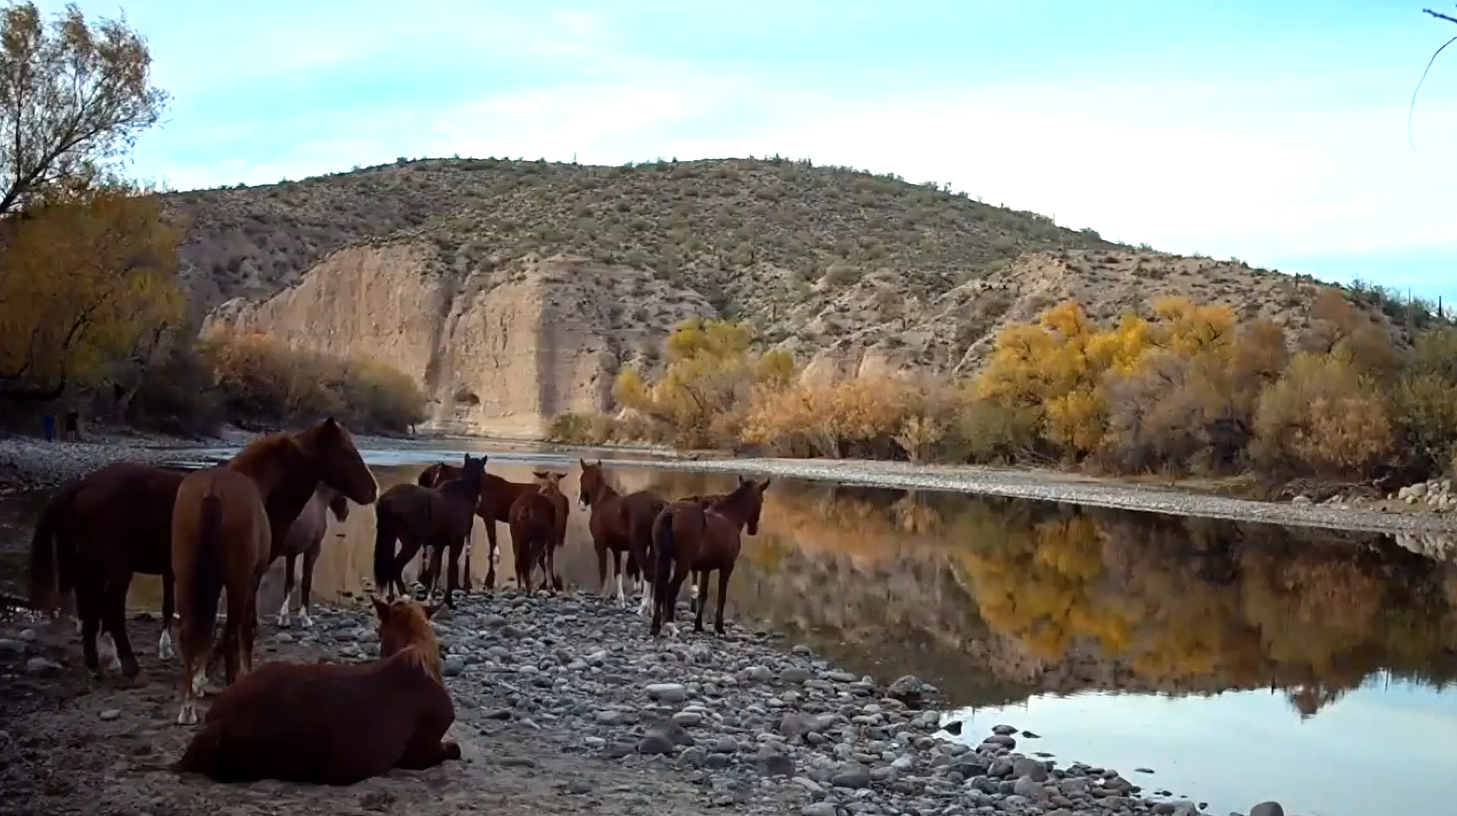 Salt River wild horses are slowly waking up waiting for the sun to rise.